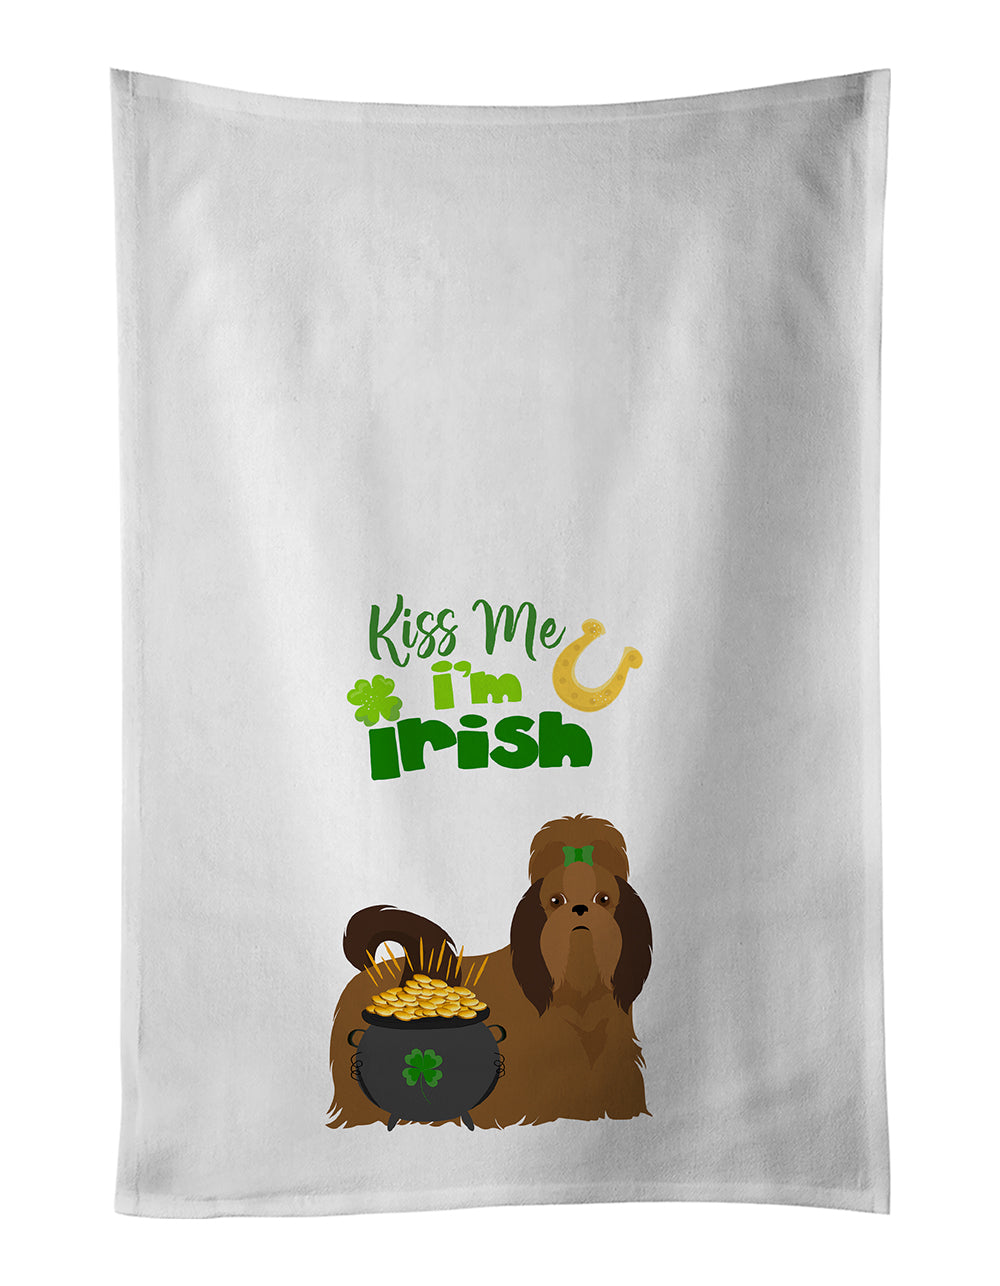 Buy this Red Shih Tzu St. Patrick's Day White Kitchen Towel Set of 2 Dish Towels